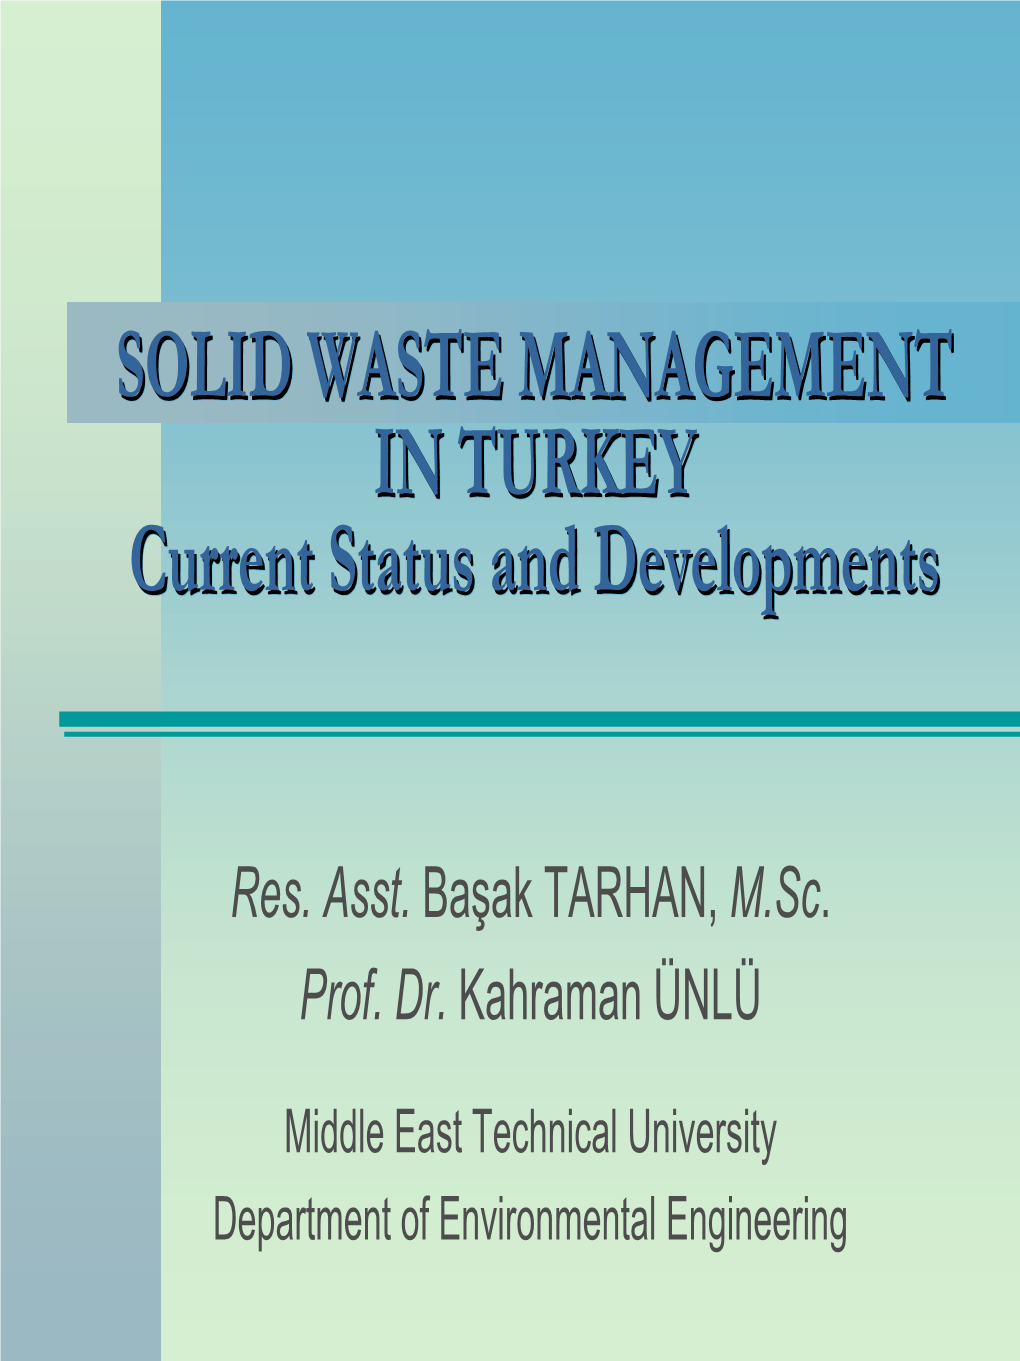 Solid Waste Management in Turkey Needs Significant Improvements